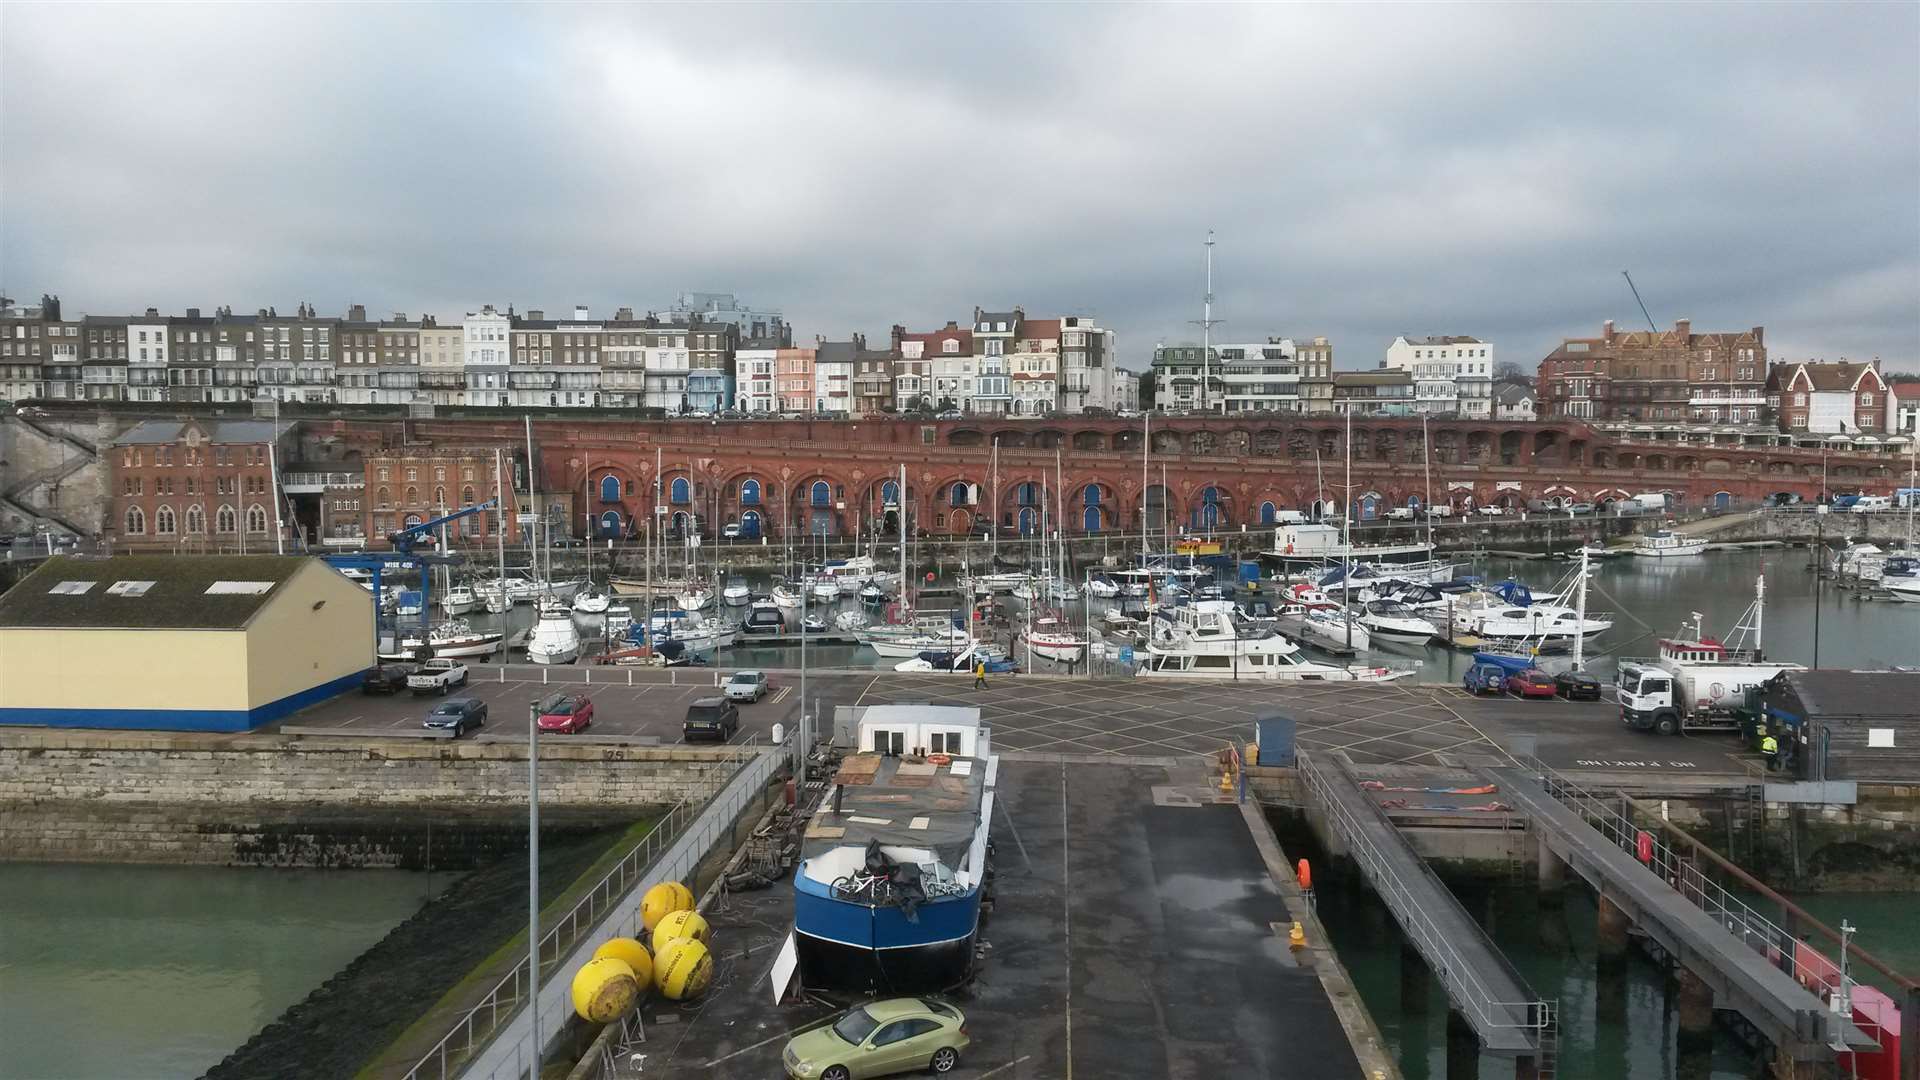 The incident took place at Ramsgate Harbour